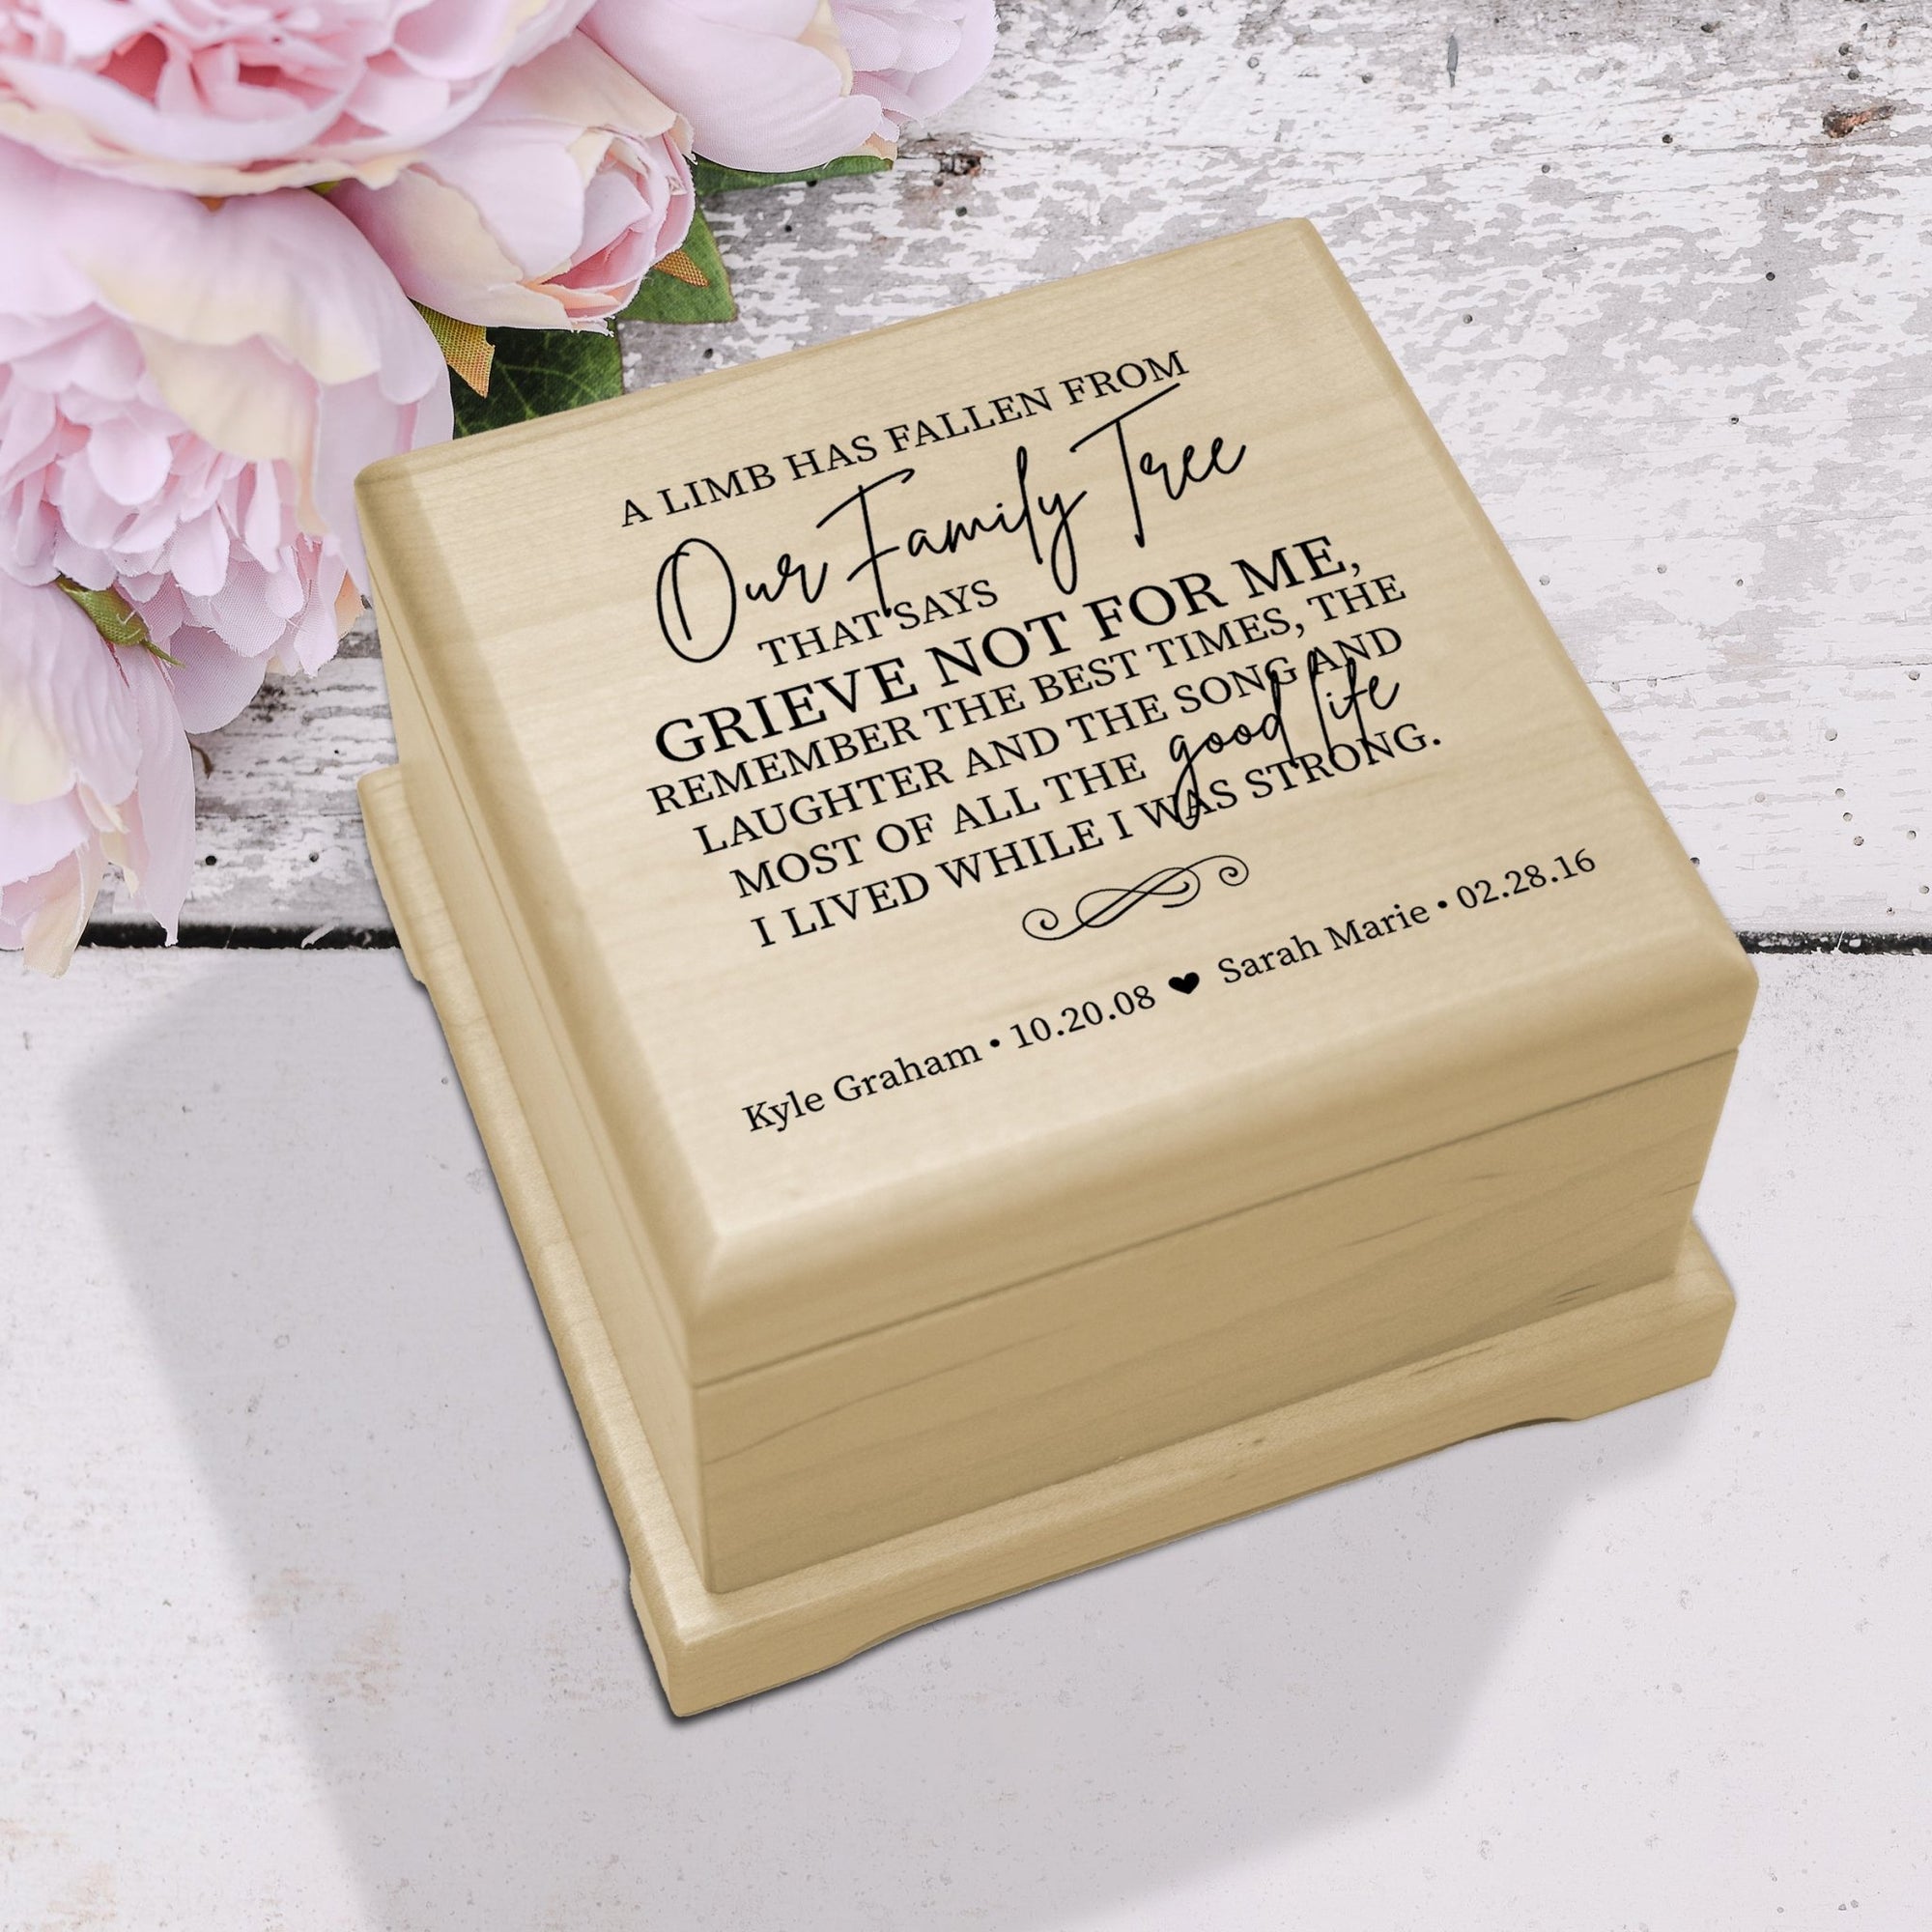 Personalized Engraved Memorial Floral Cremation Urn Box - A Limb Has Fallen - LifeSong Milestones